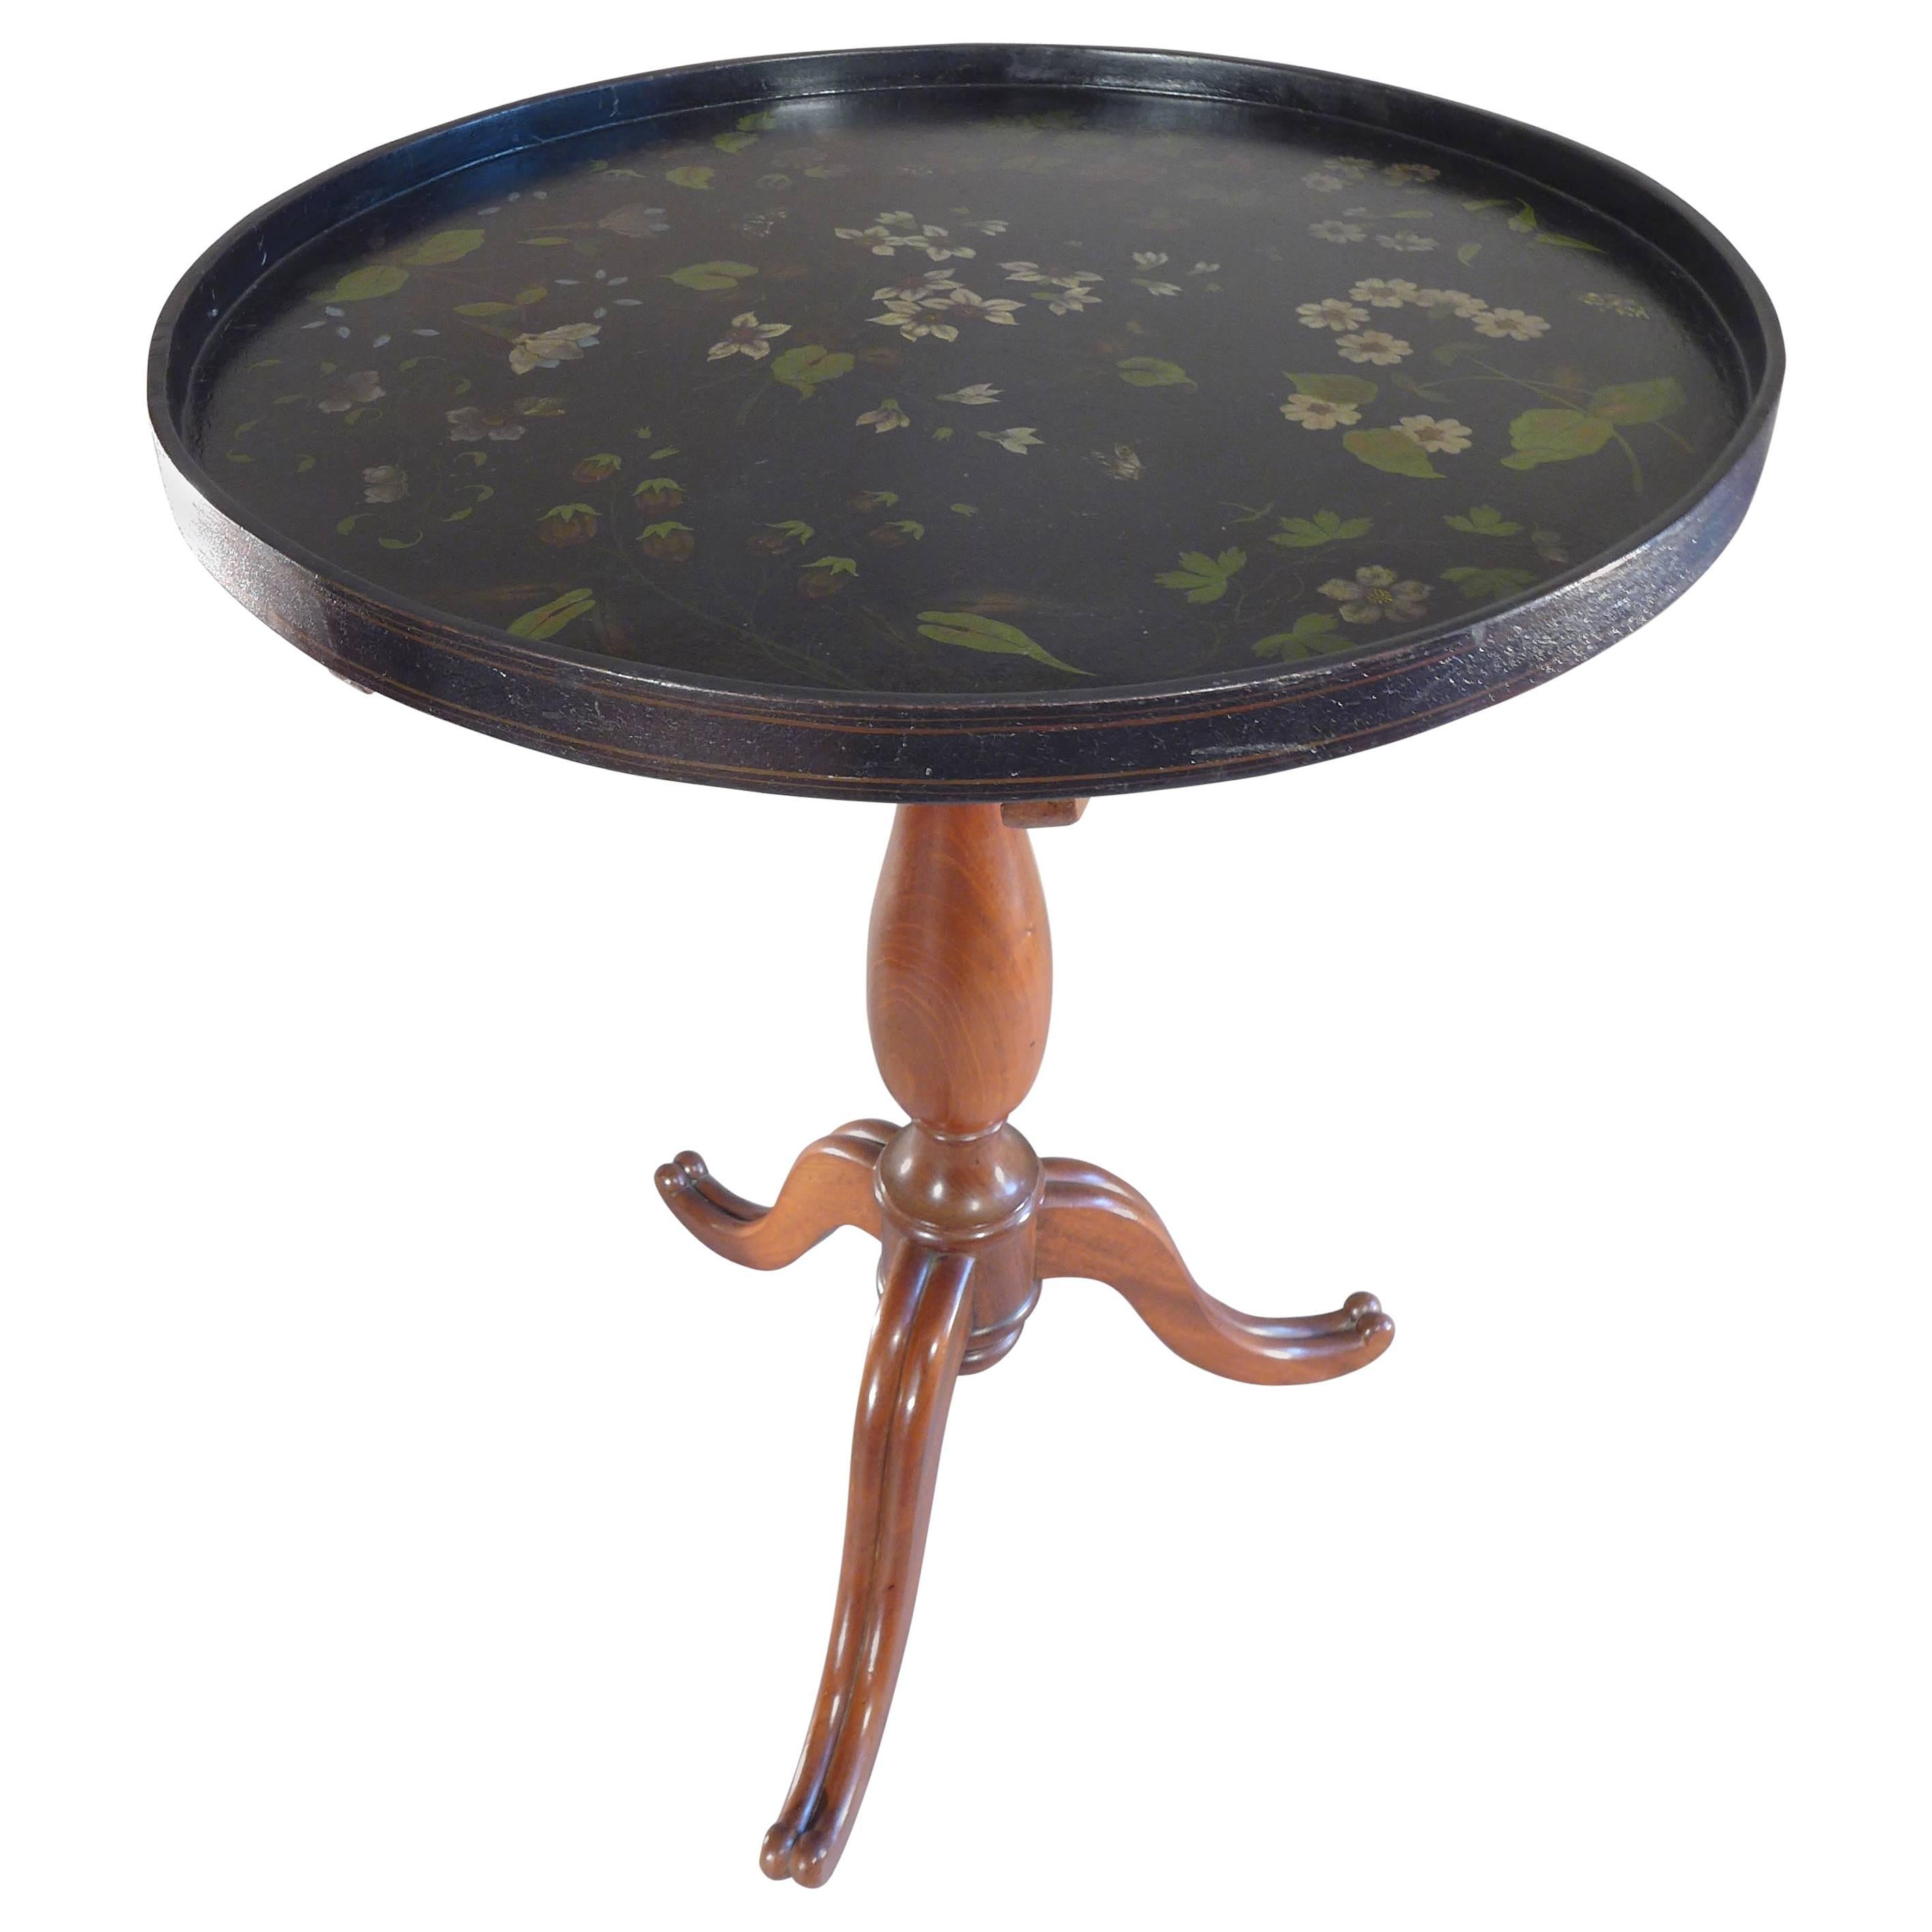 Louis XVI Period, Mahogany and Painted Iron Round Pedestal Table, circa 1780 For Sale